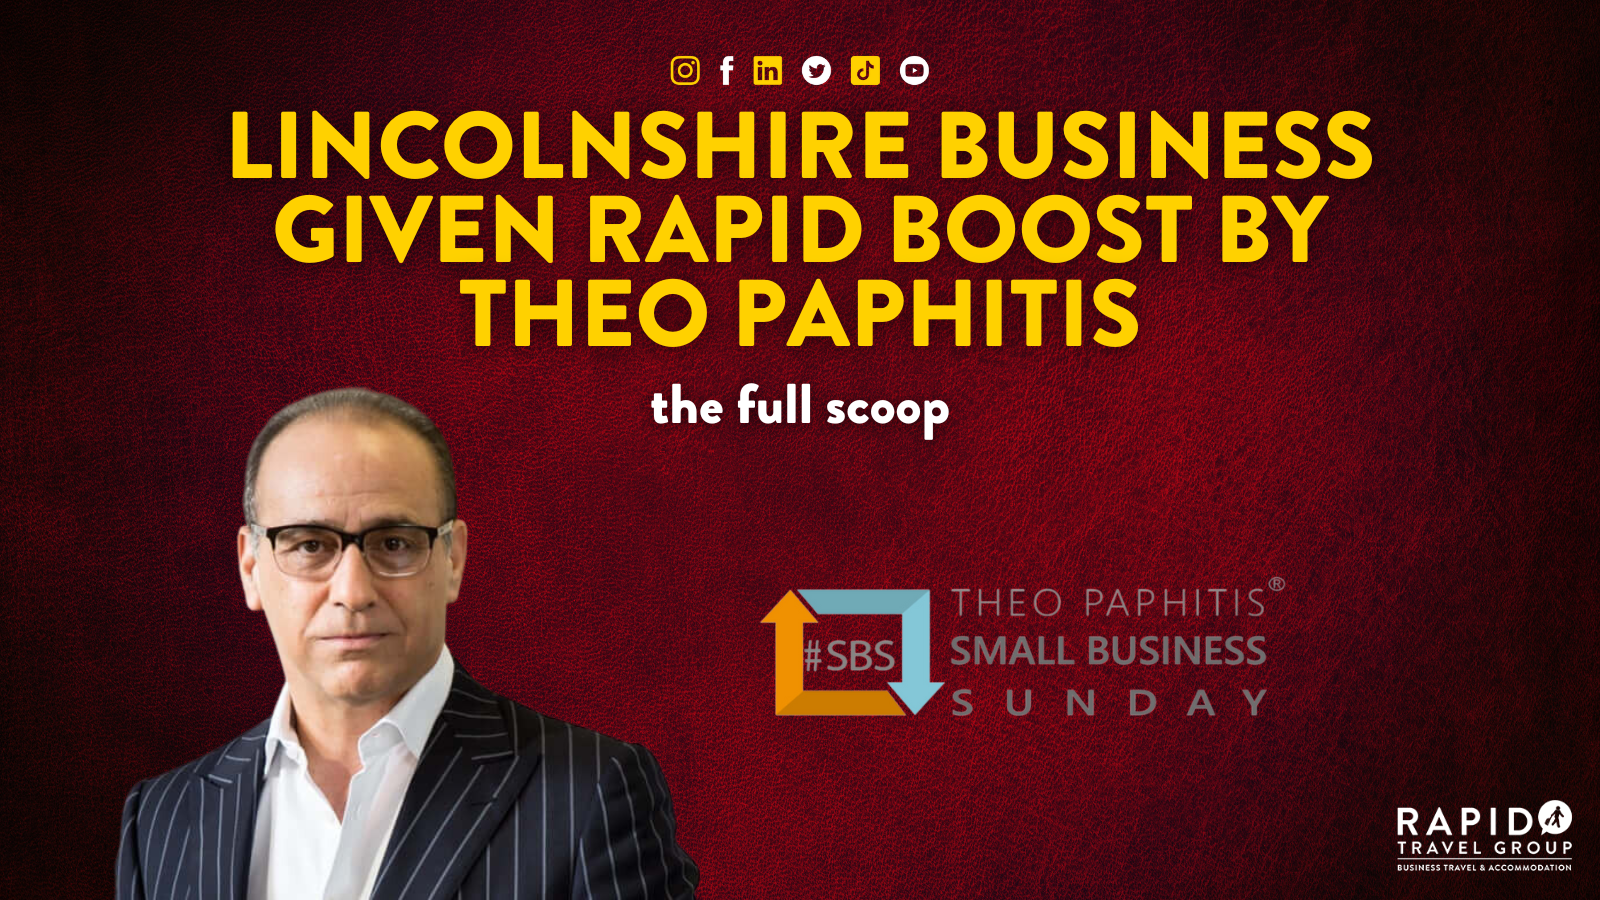 Lincolnshire Business Given Rapid Boost by Theo Paphitis